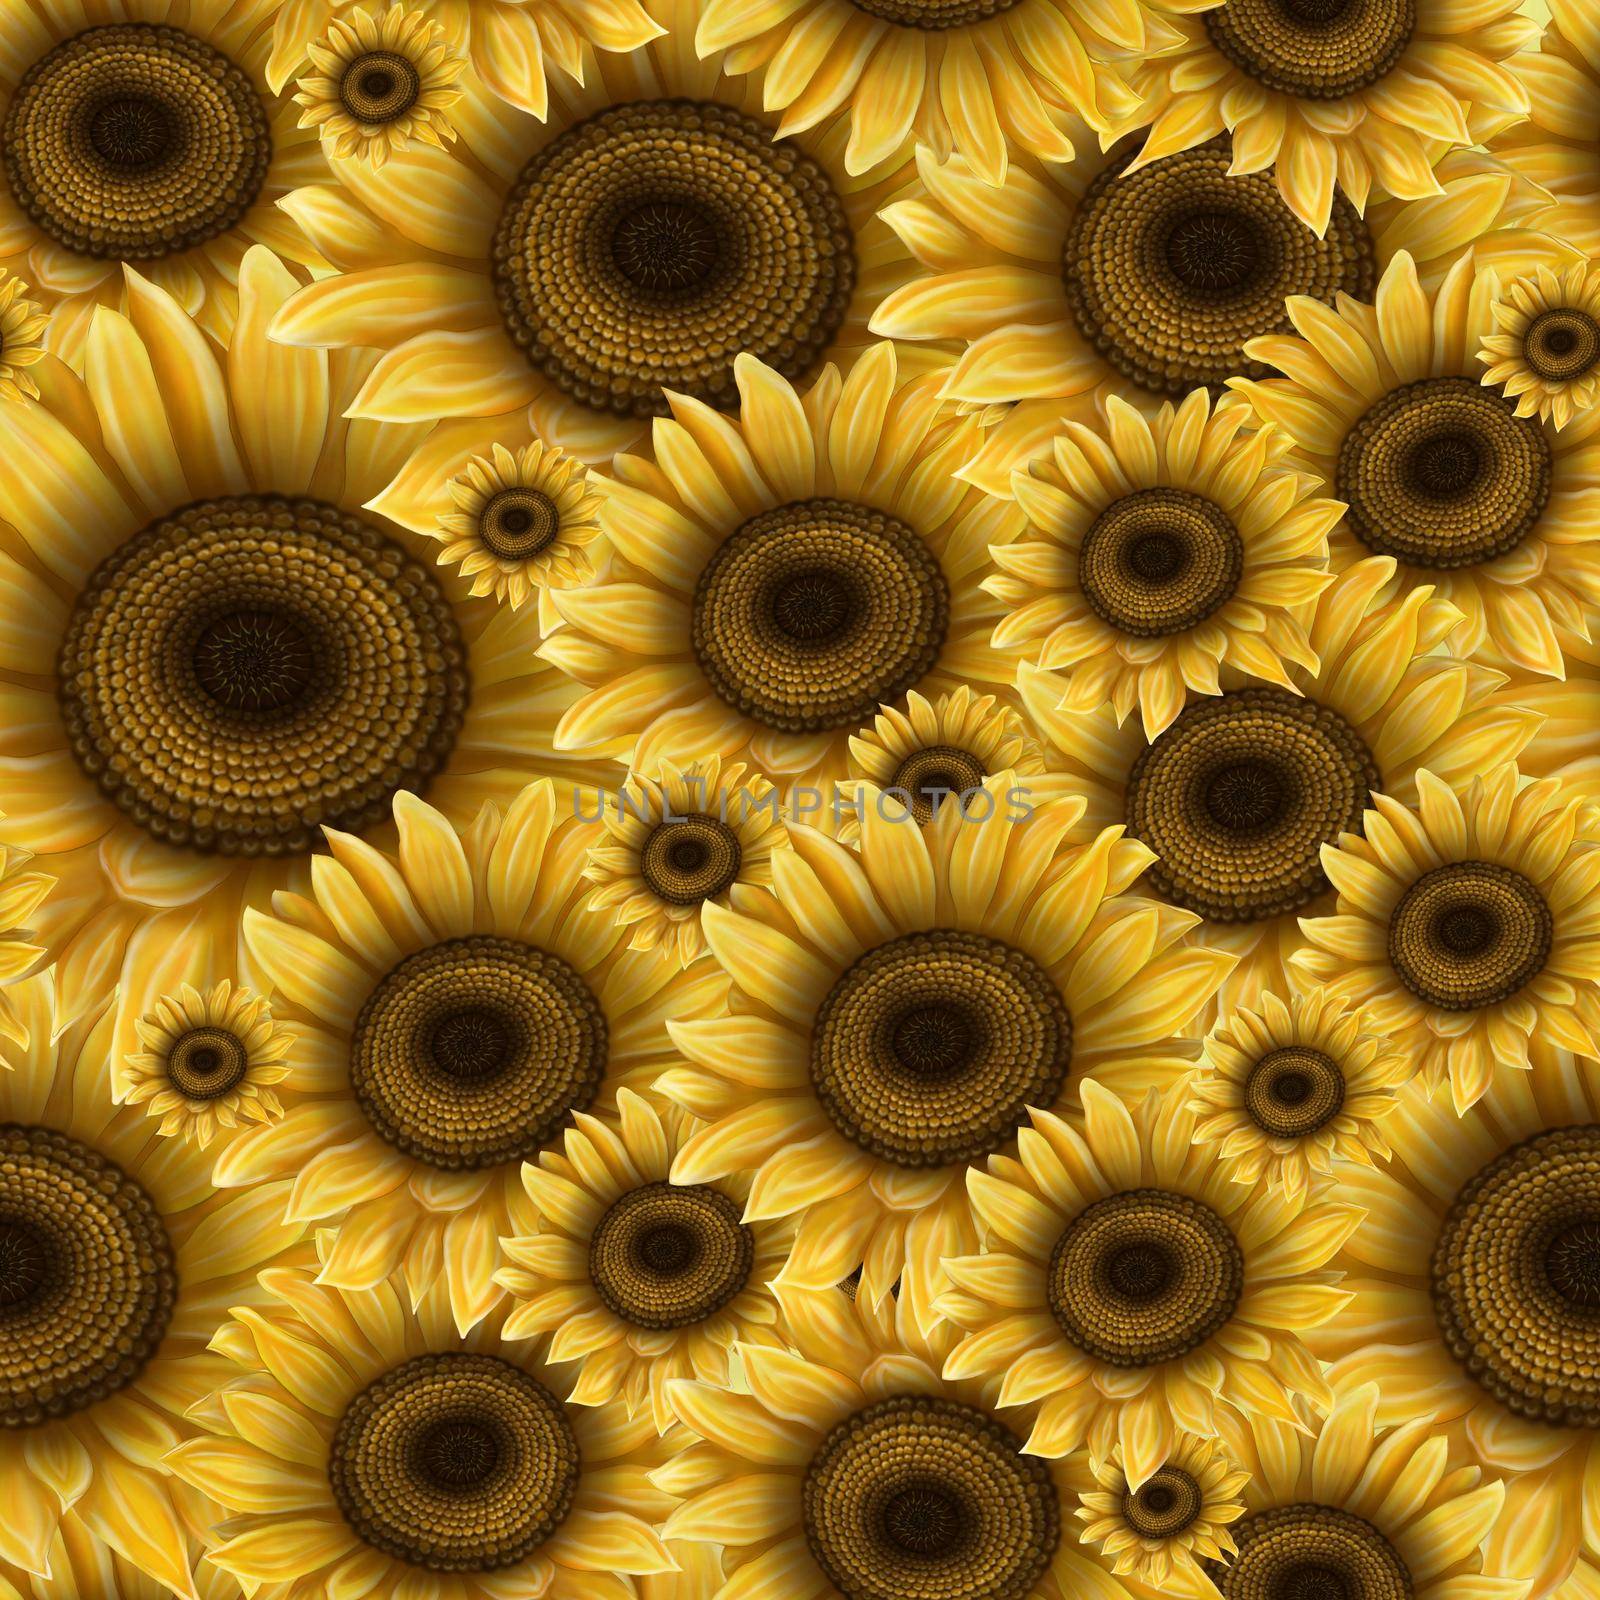 Seamless pattern for printing. Illustration of sunflower flowers. Bright flowers on a light background. Summer, sunflowers.